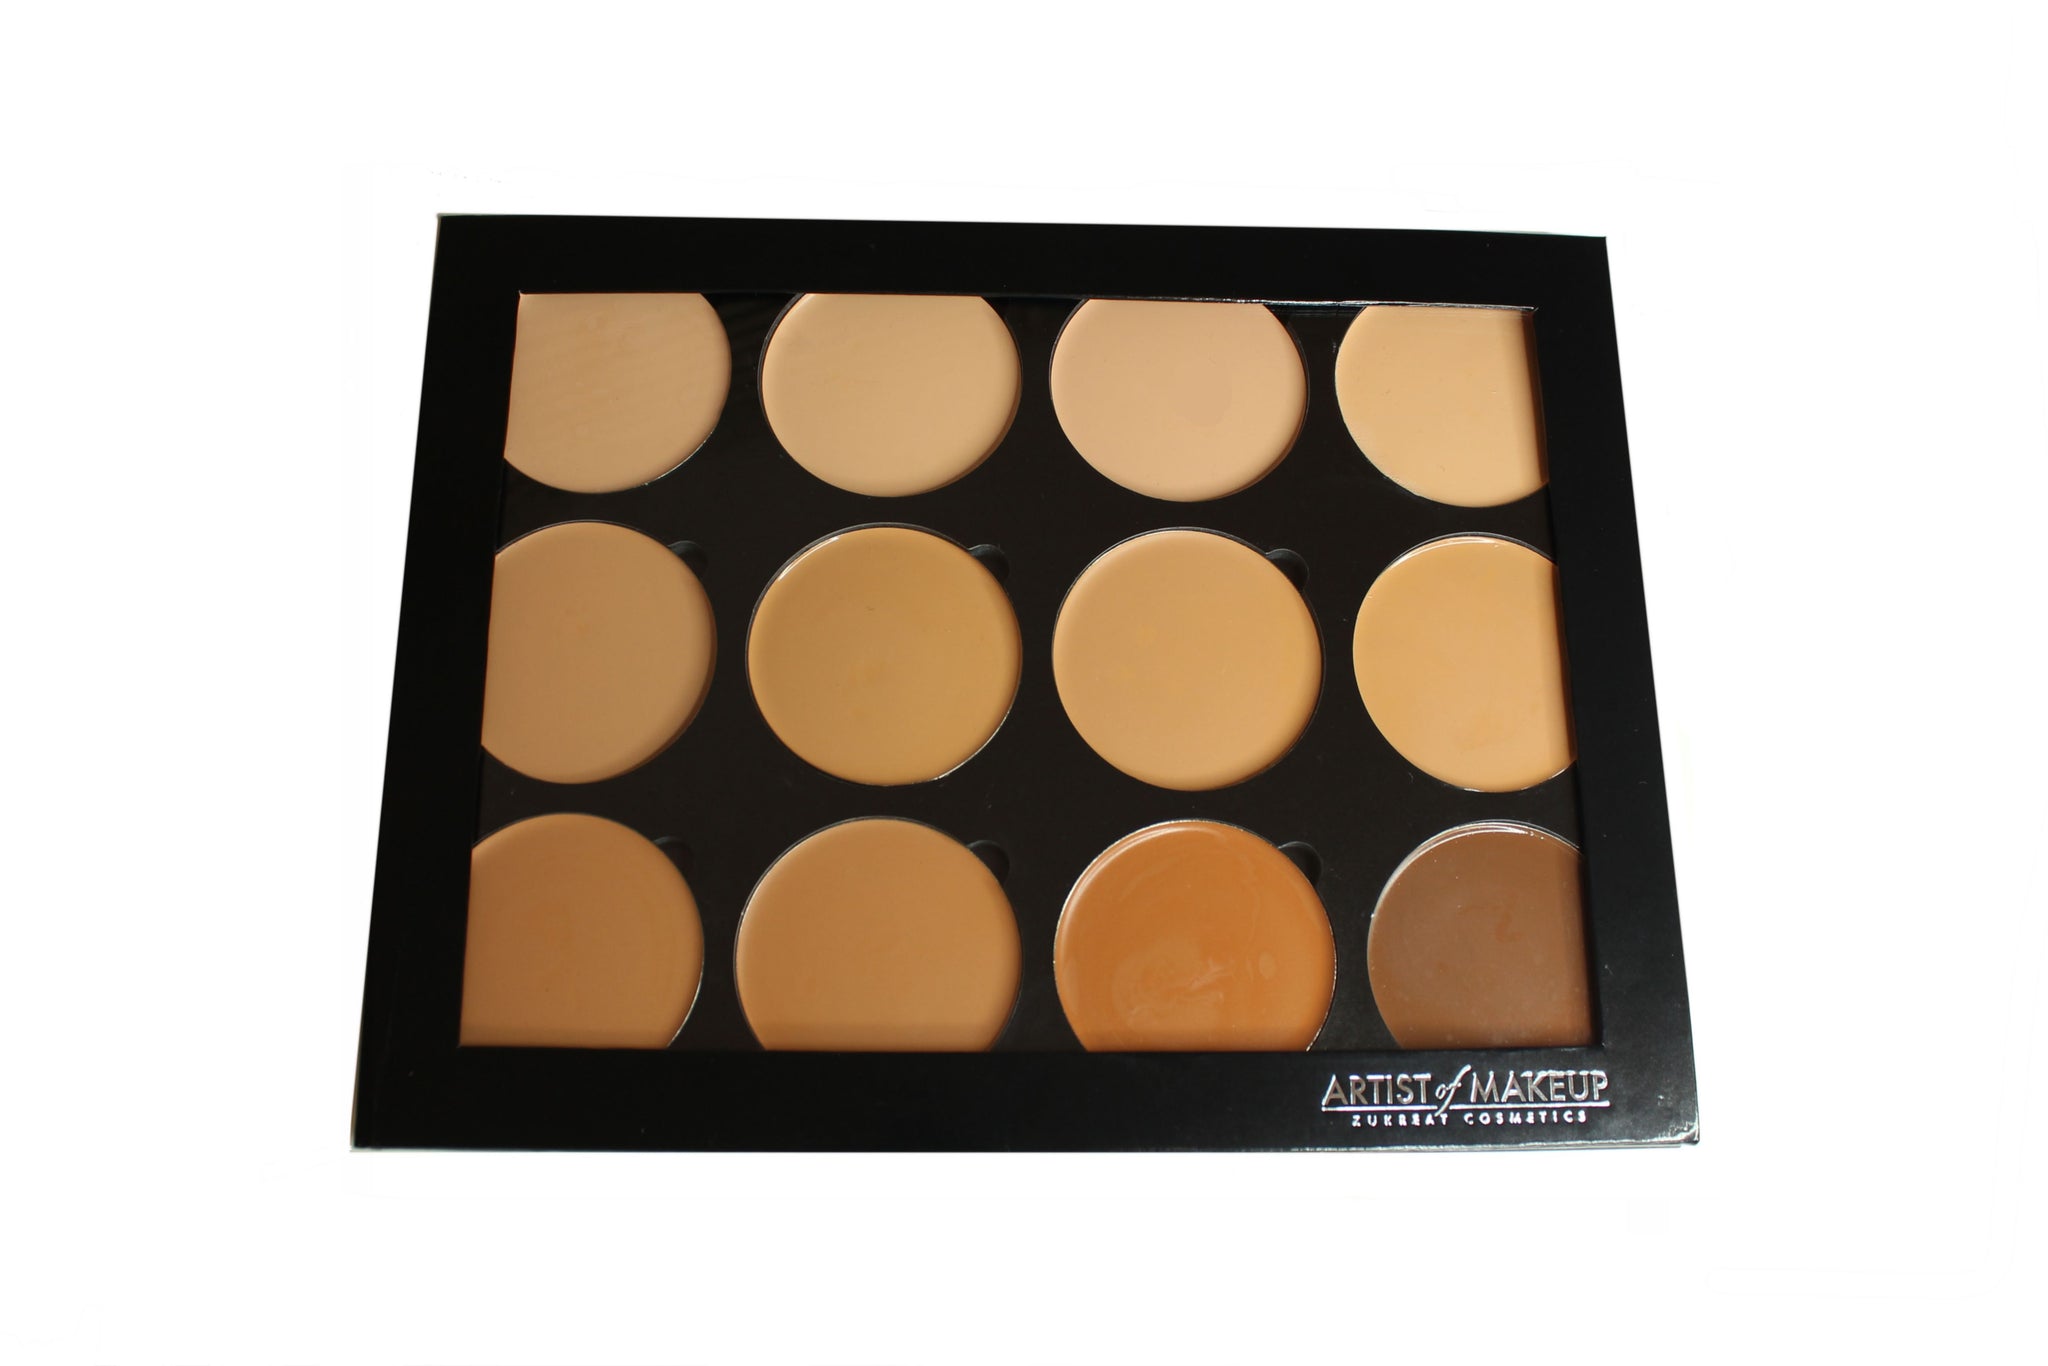 Pro 12 Flawless Foundation Palette